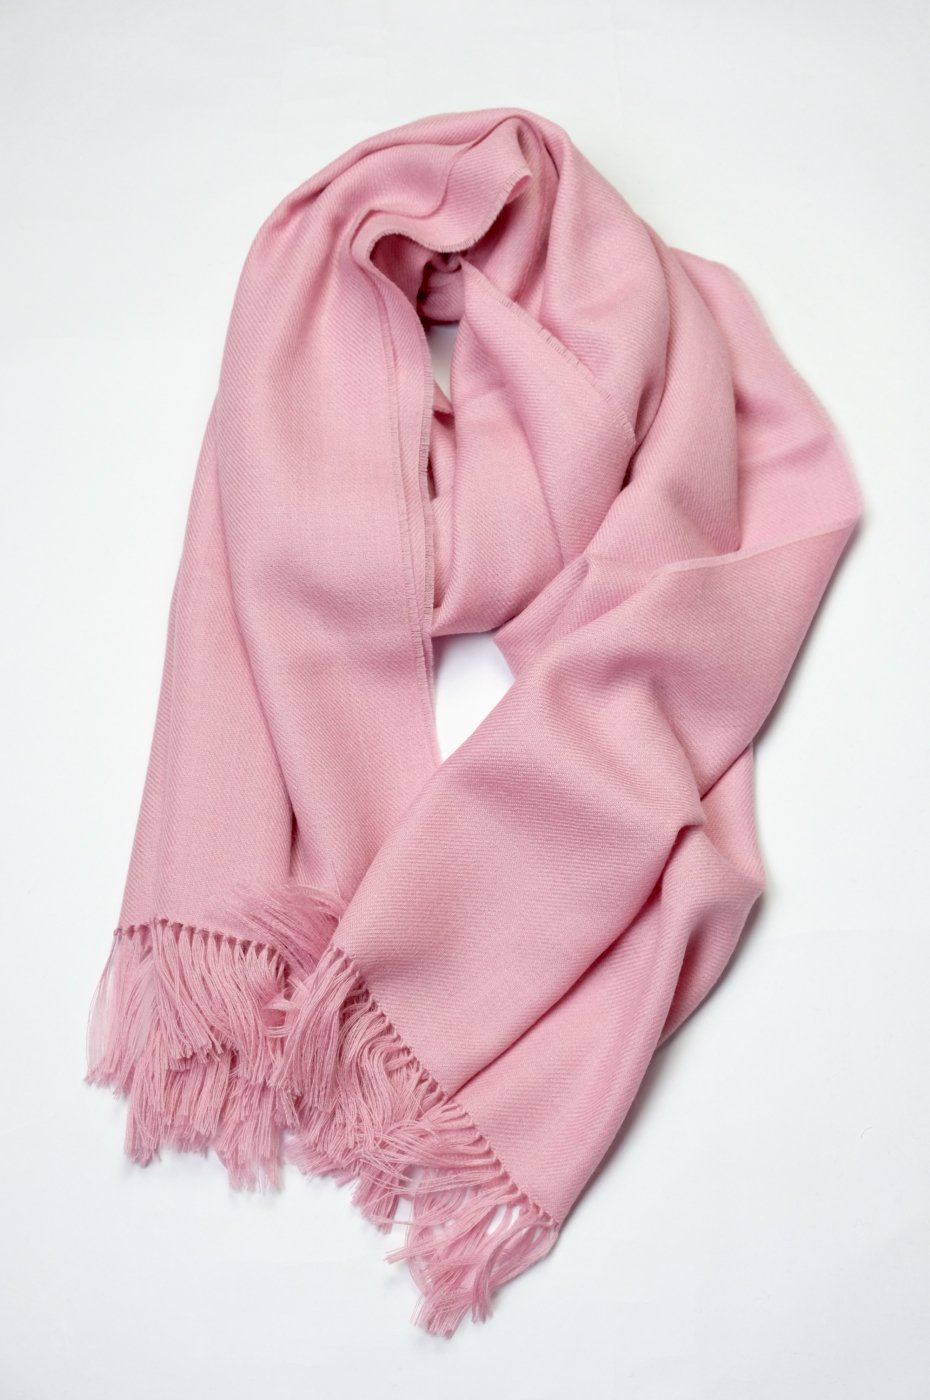 THE INOUE BROTHERS...ザ イノウエブラザーズ-NON BRUSHED LARGE STOLE-BABY PINK-